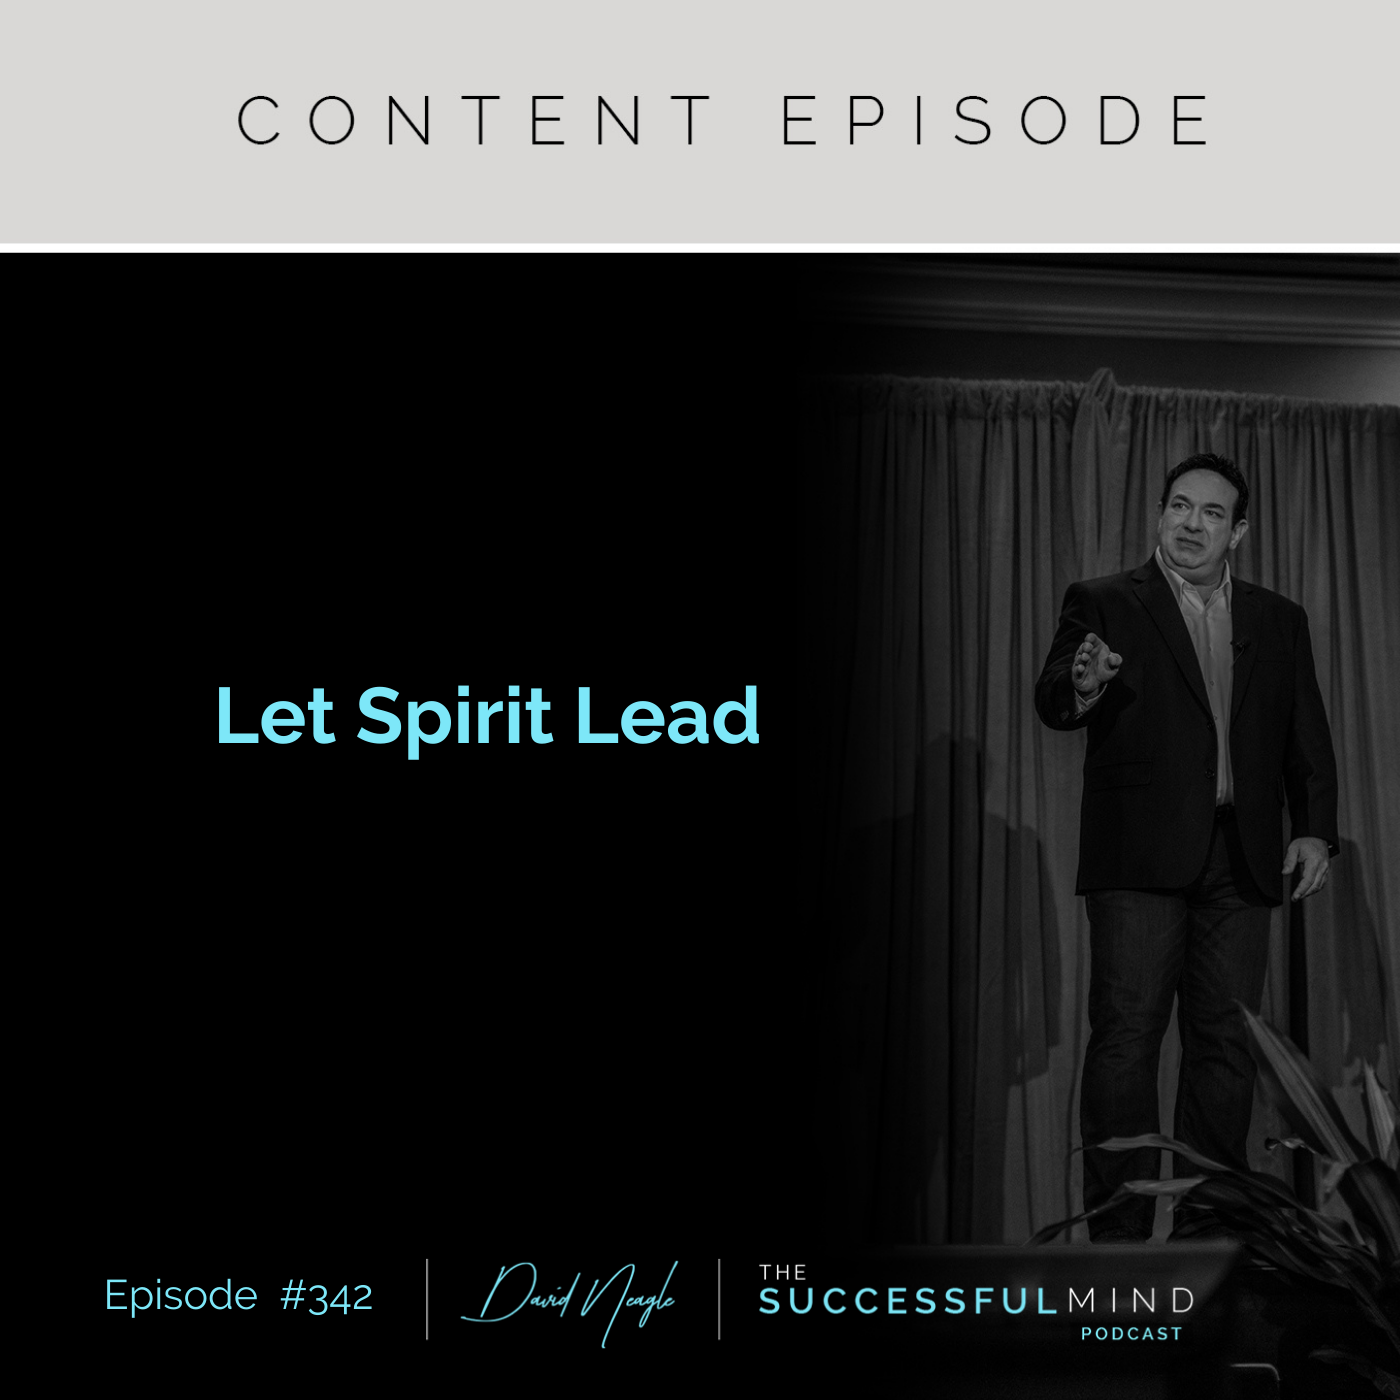 The Successful Mind Podcast - Episode 342 - Let Spirit Lead